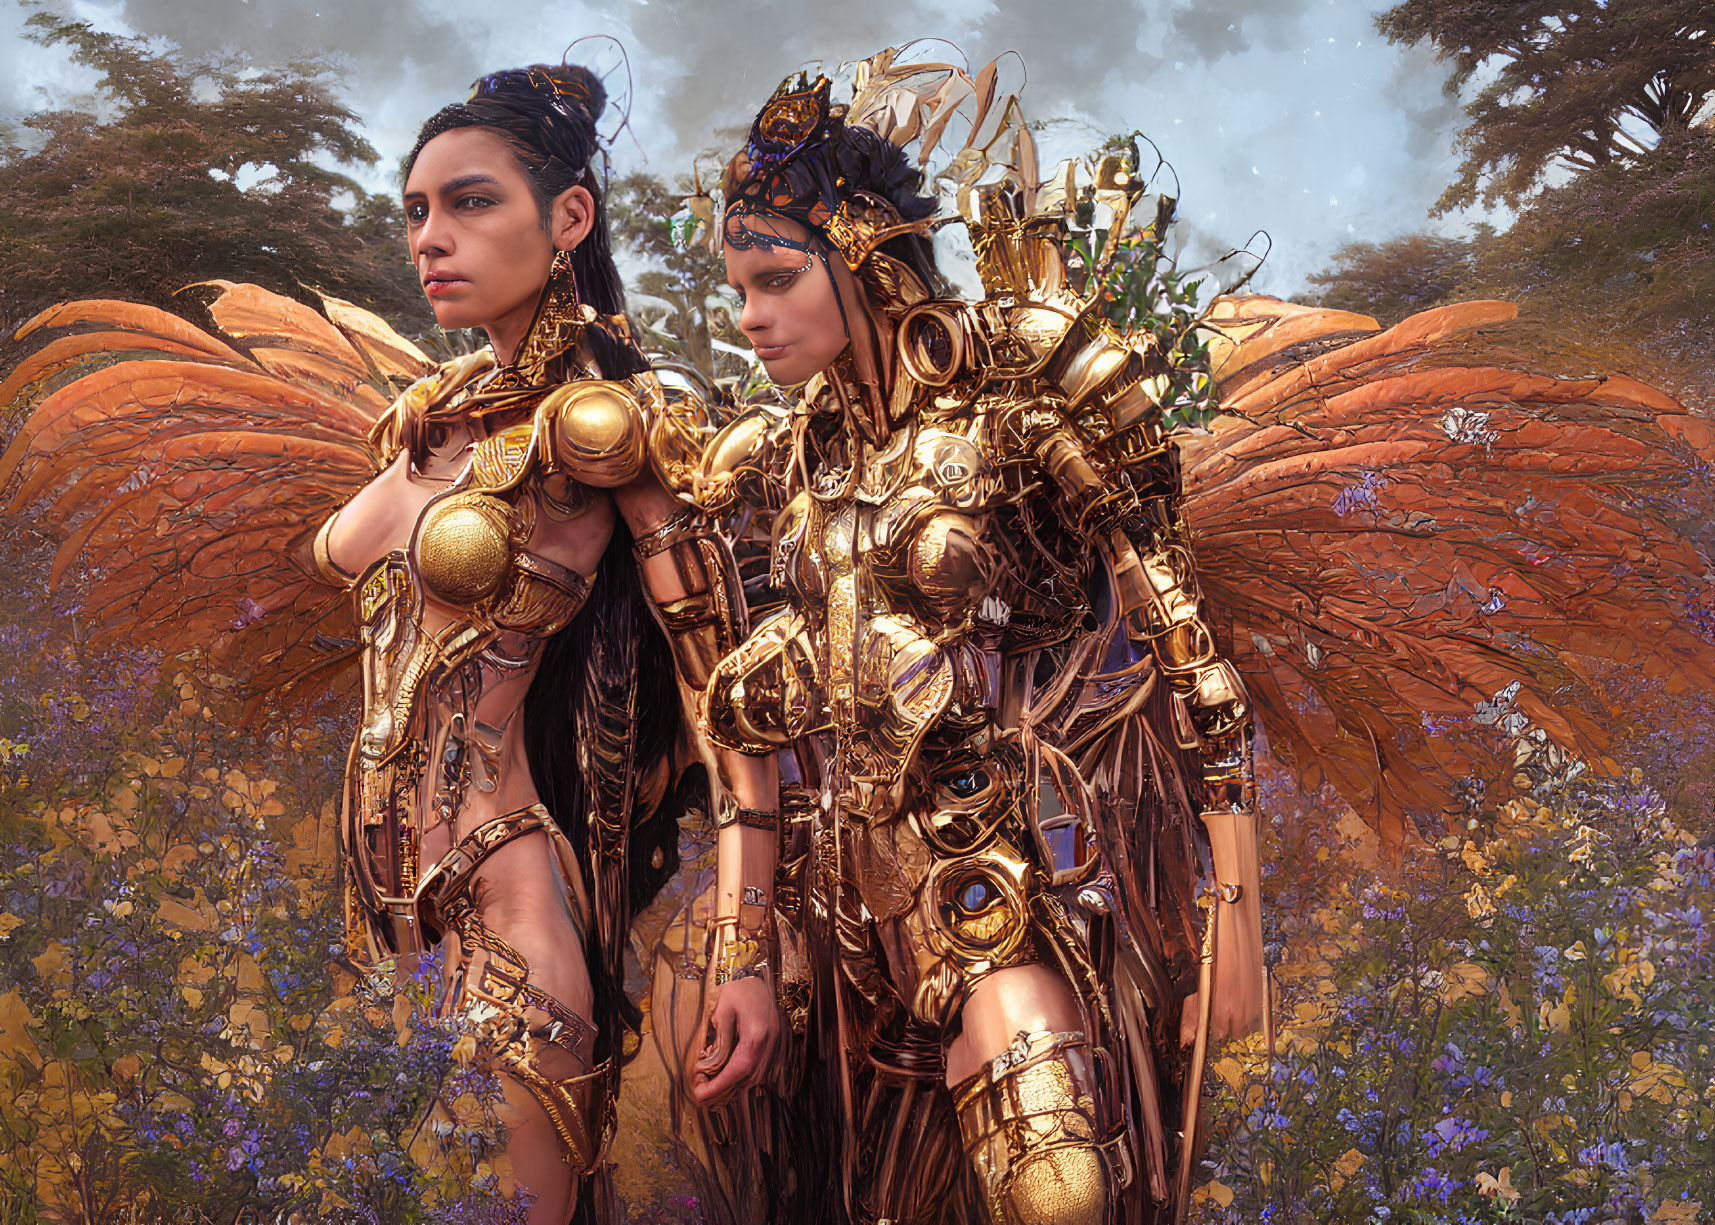 Two Women in Golden Armor with Mechanical Wings Among Purple Flowers